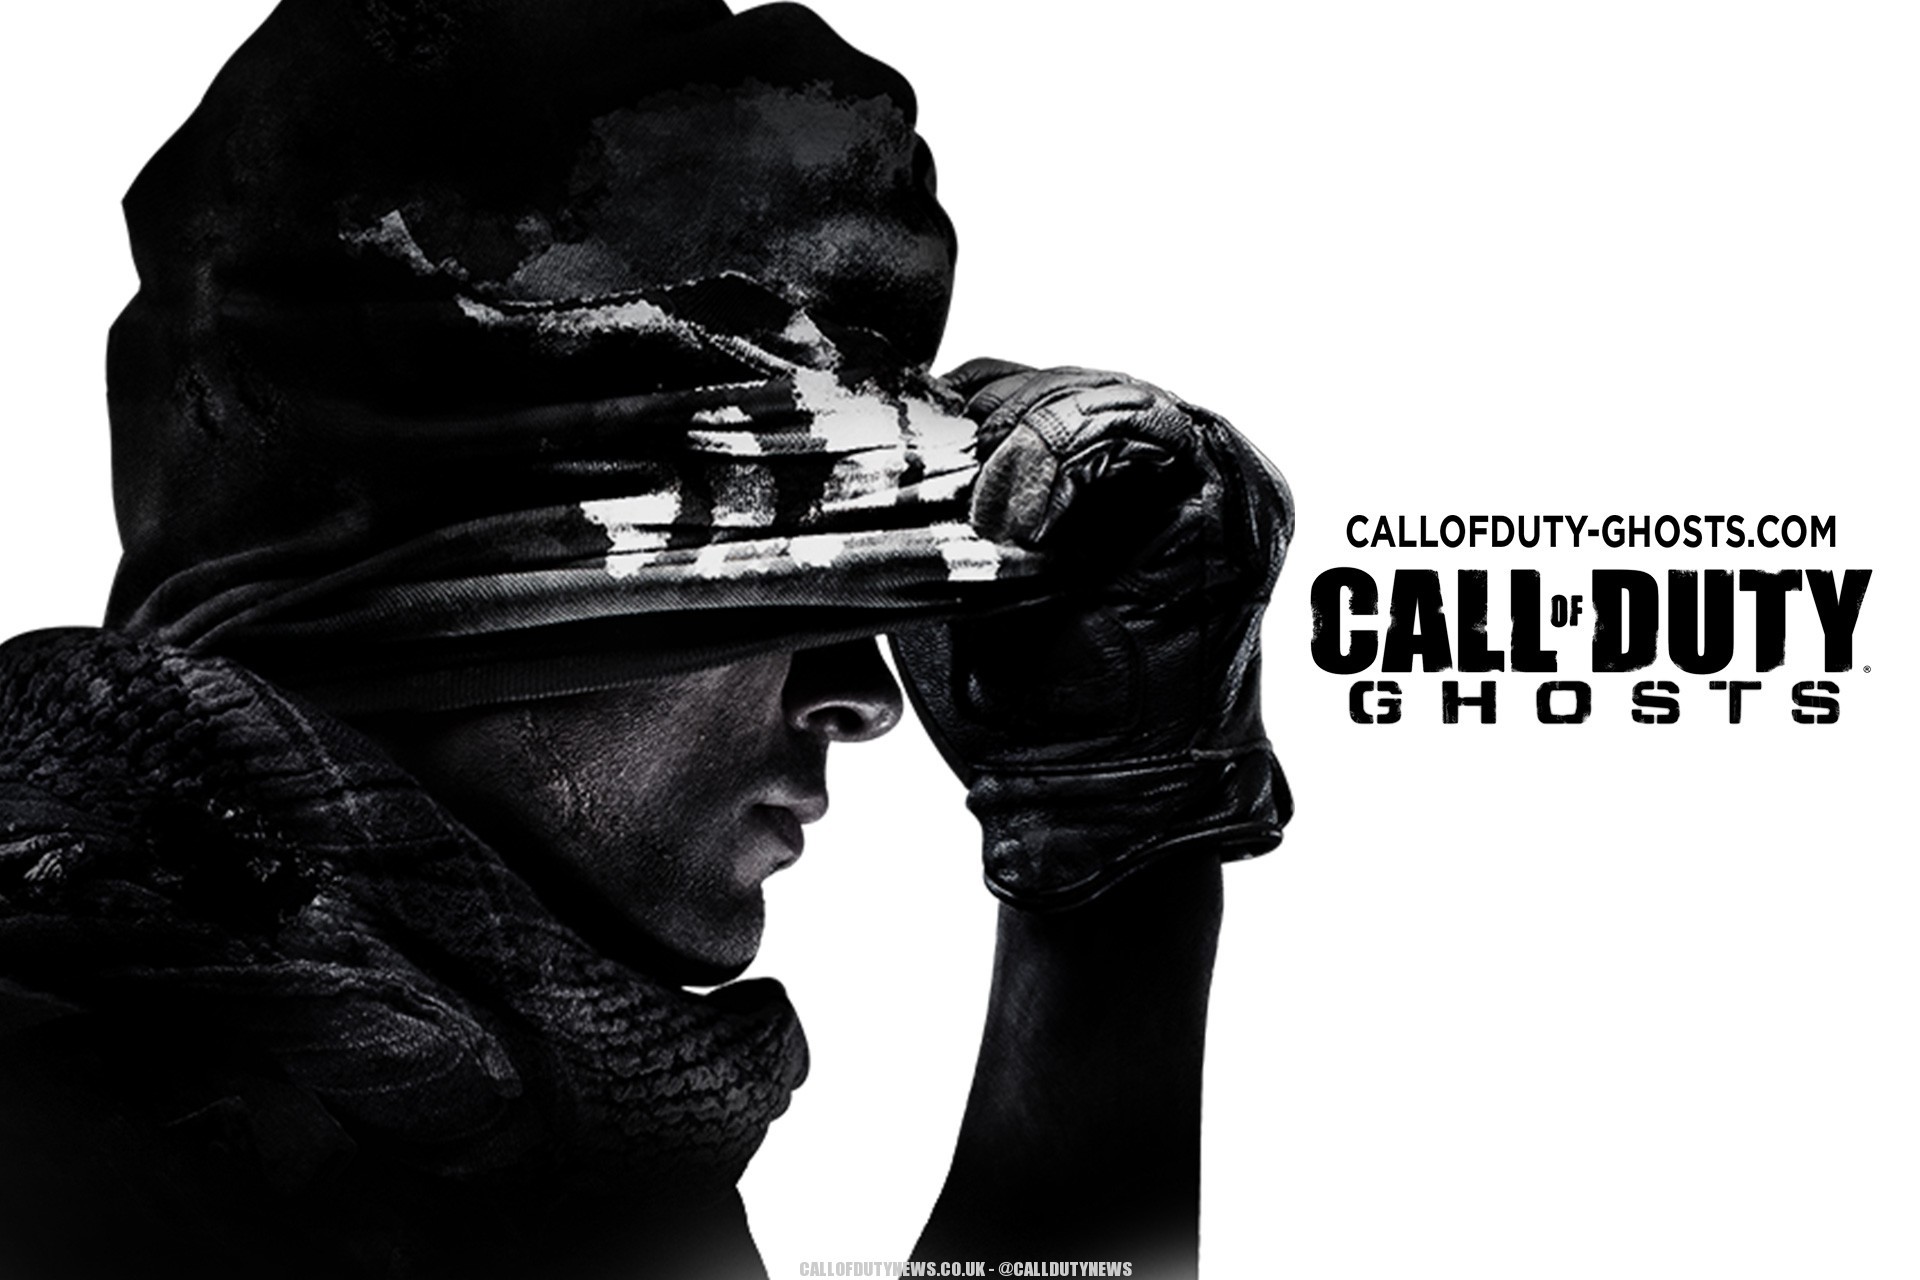 call of duty: ghosts the white screensaver Desktop wallpapers 1366x768